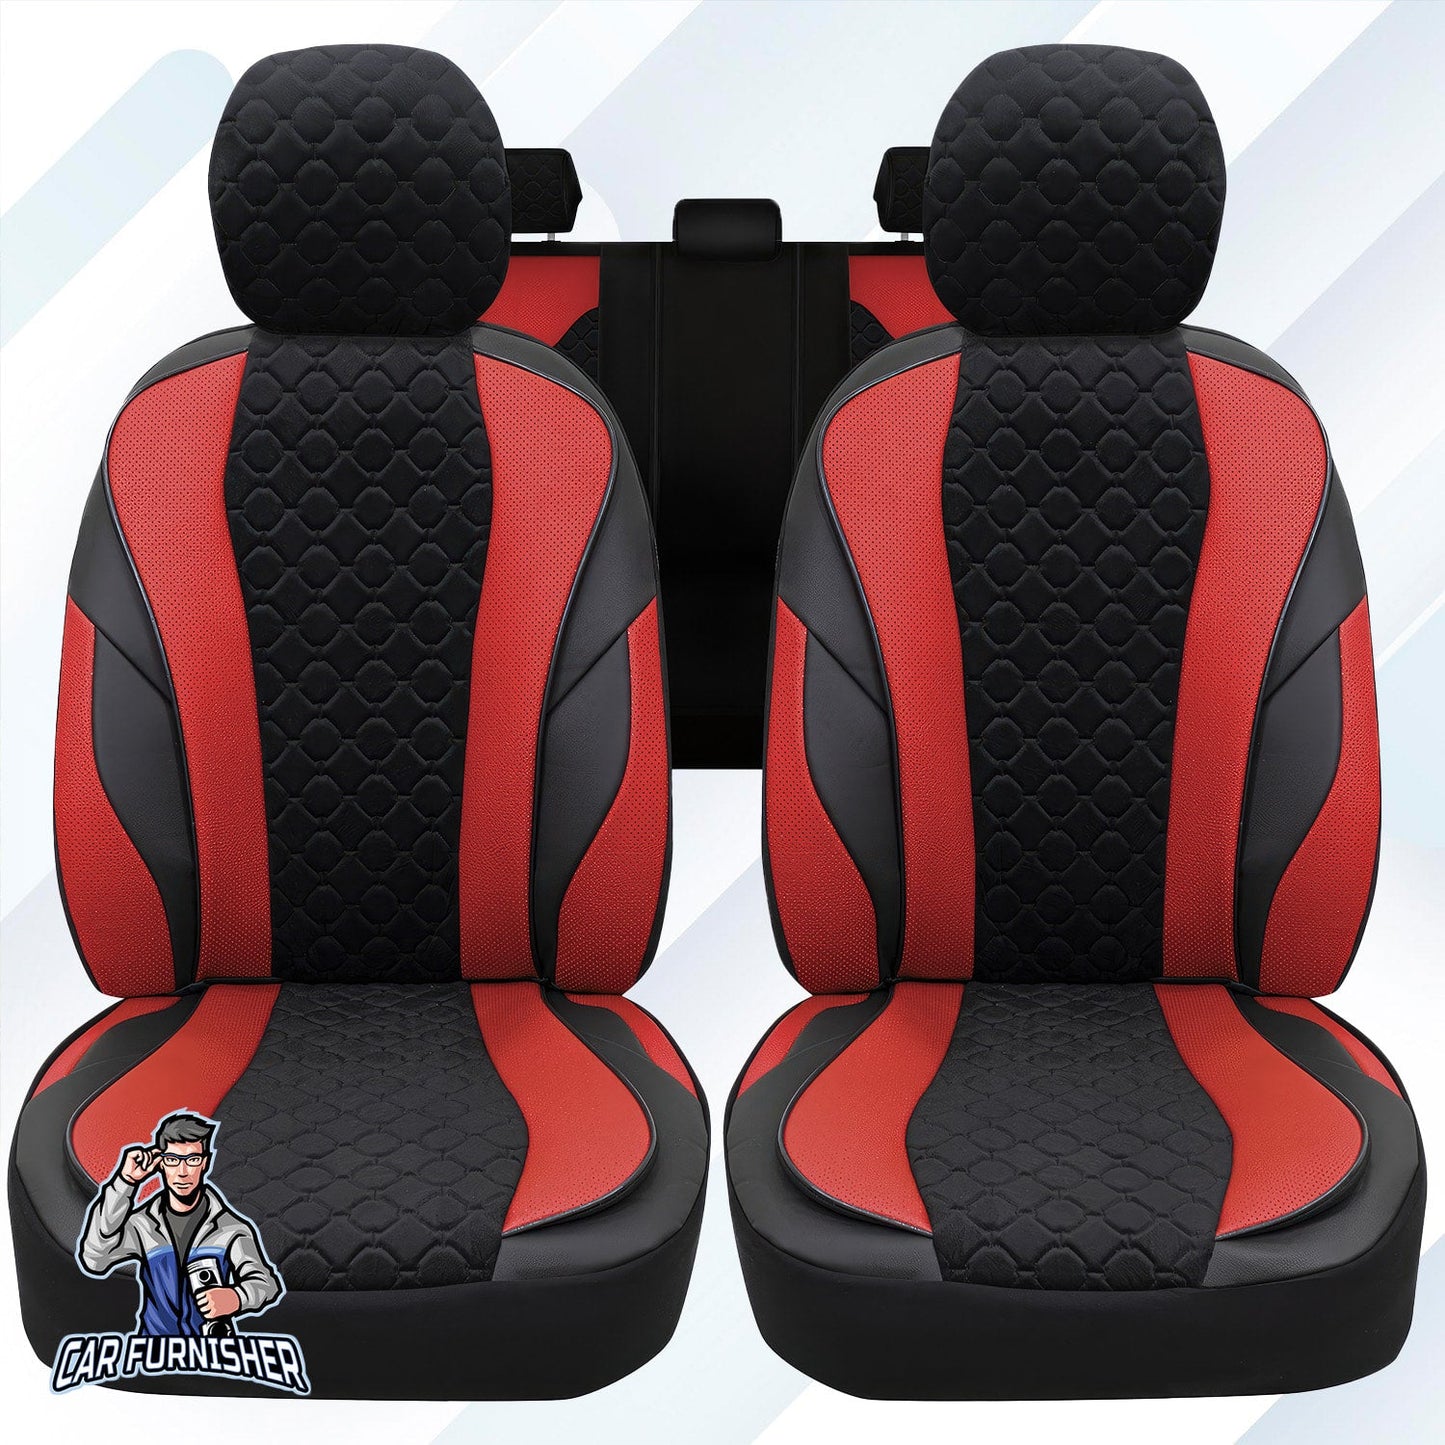 Mercedes 190 Seat Covers VIP Design Red 5 Seats + Headrests (Full Set) Leather & Foal Feather Fabric